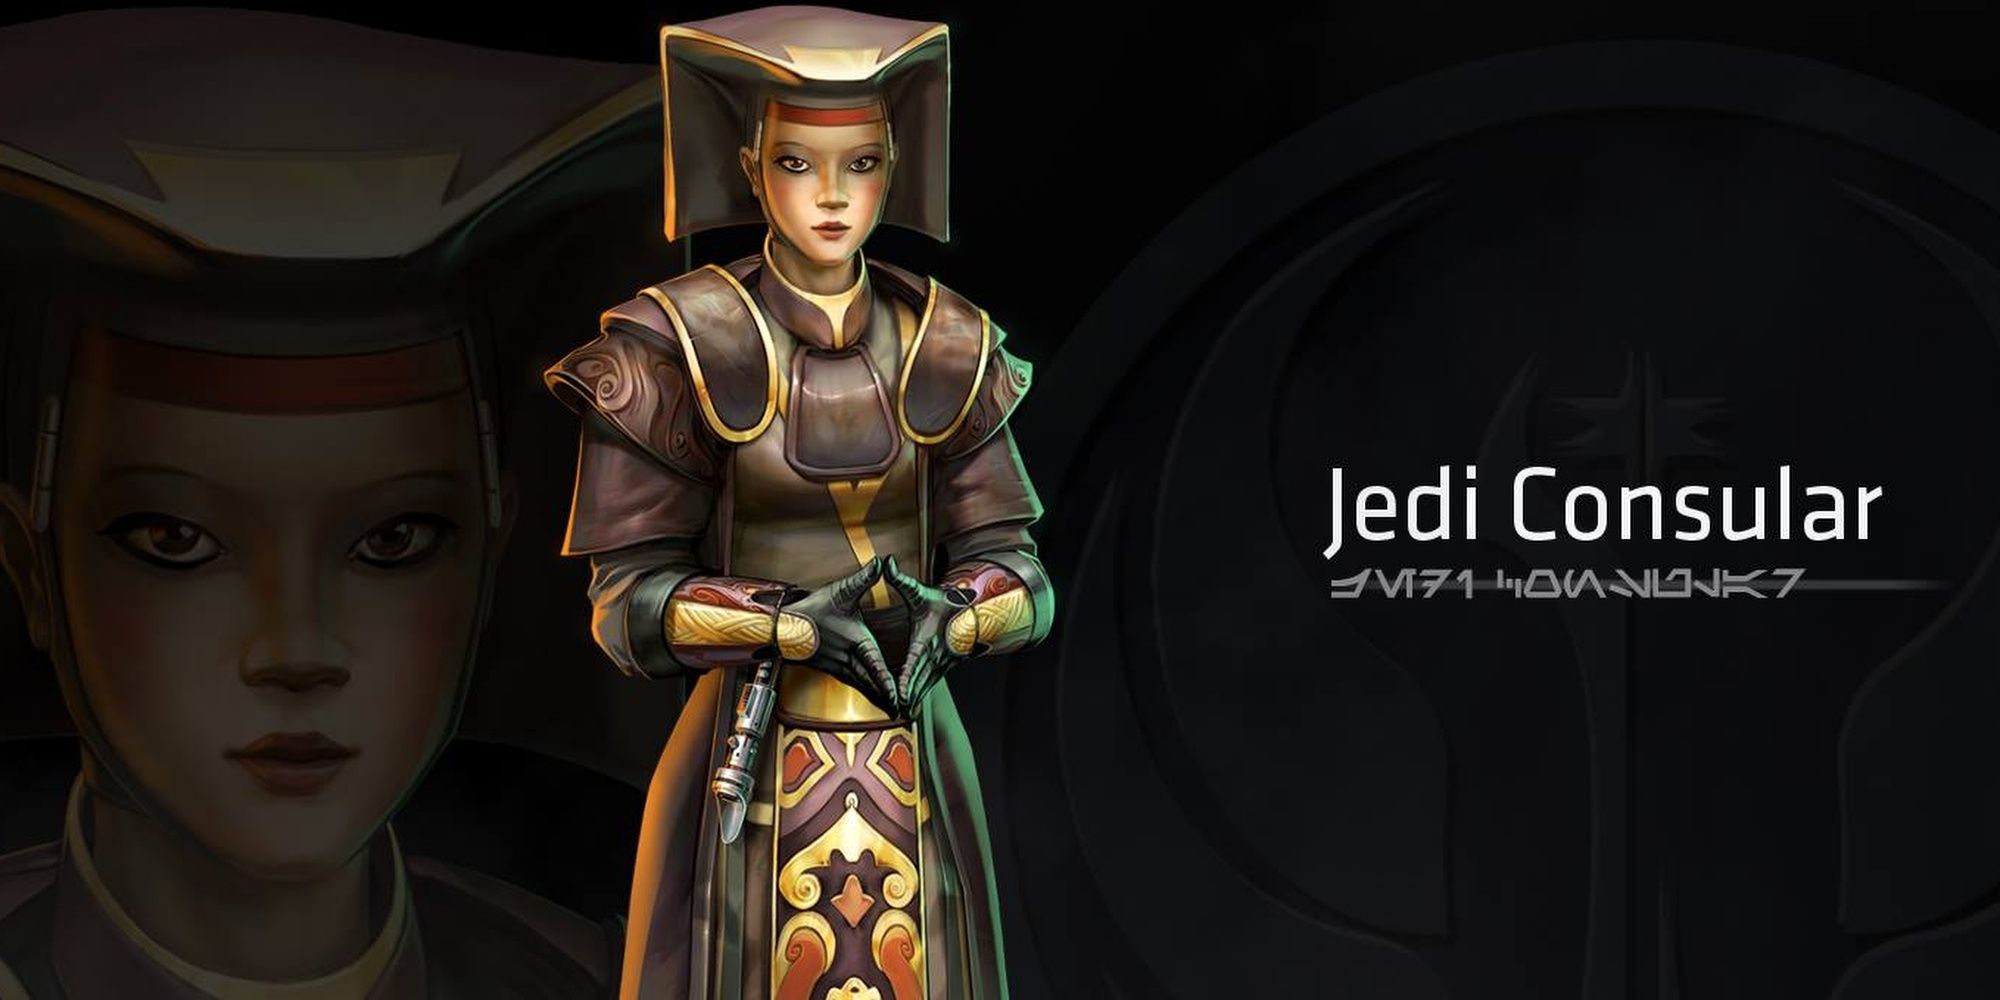 Jedi consular background from Star Wars: The Old Republic